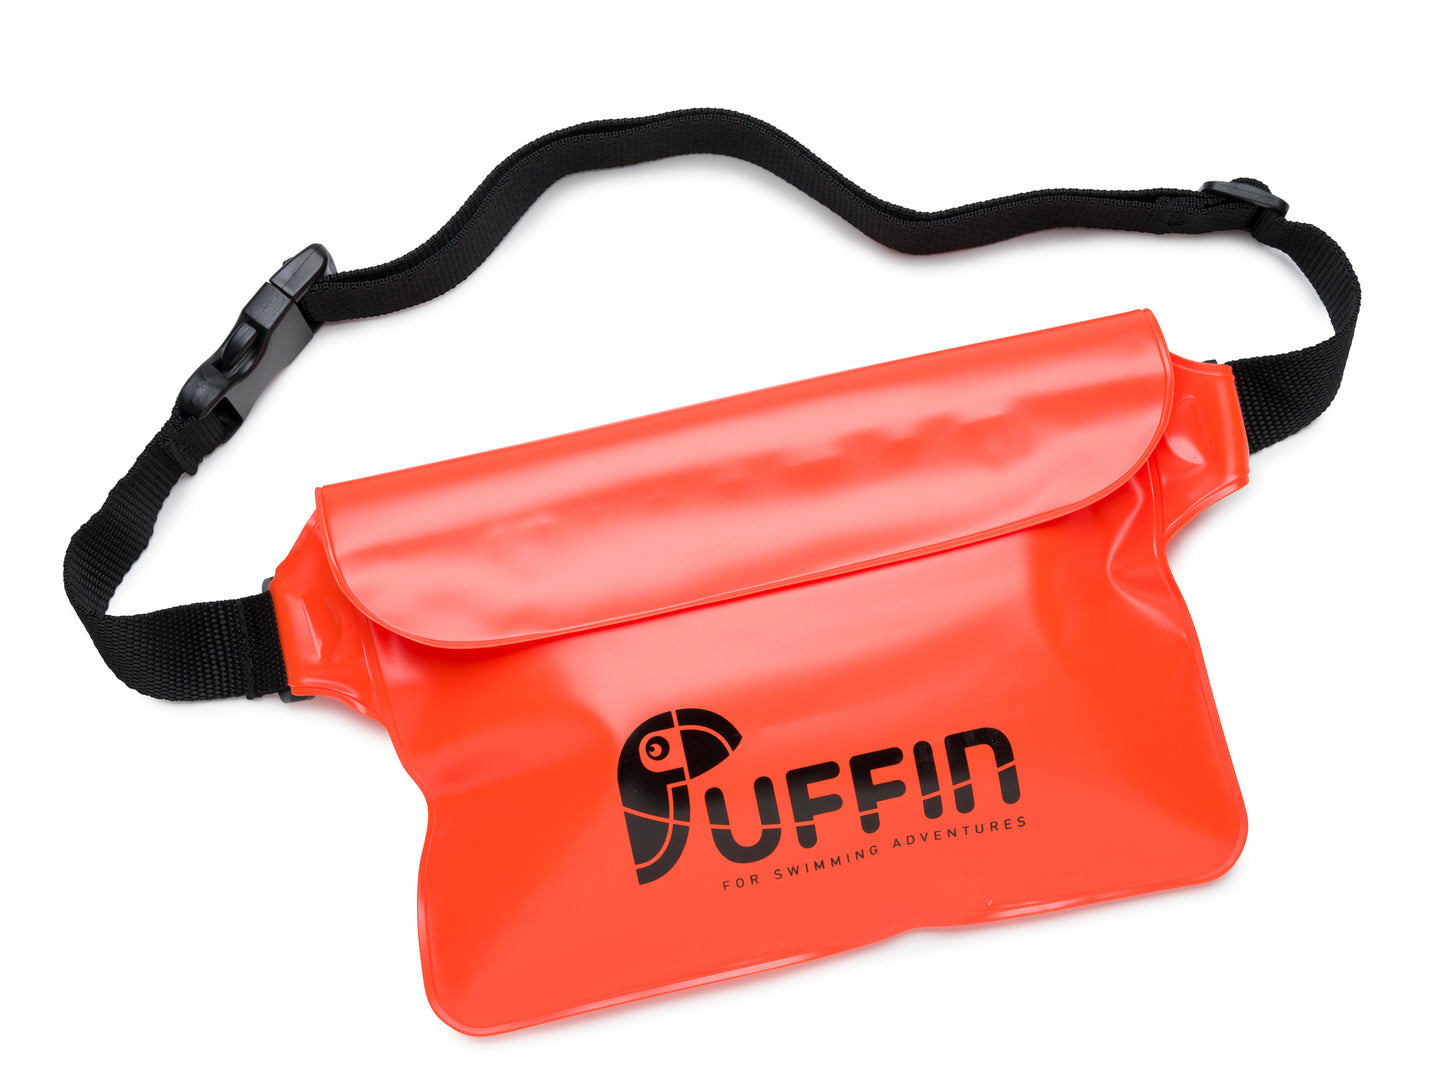 The front of a Puffin Orange Waterproof Waist Pouch Bumbag showing the Puffin logo on the front.